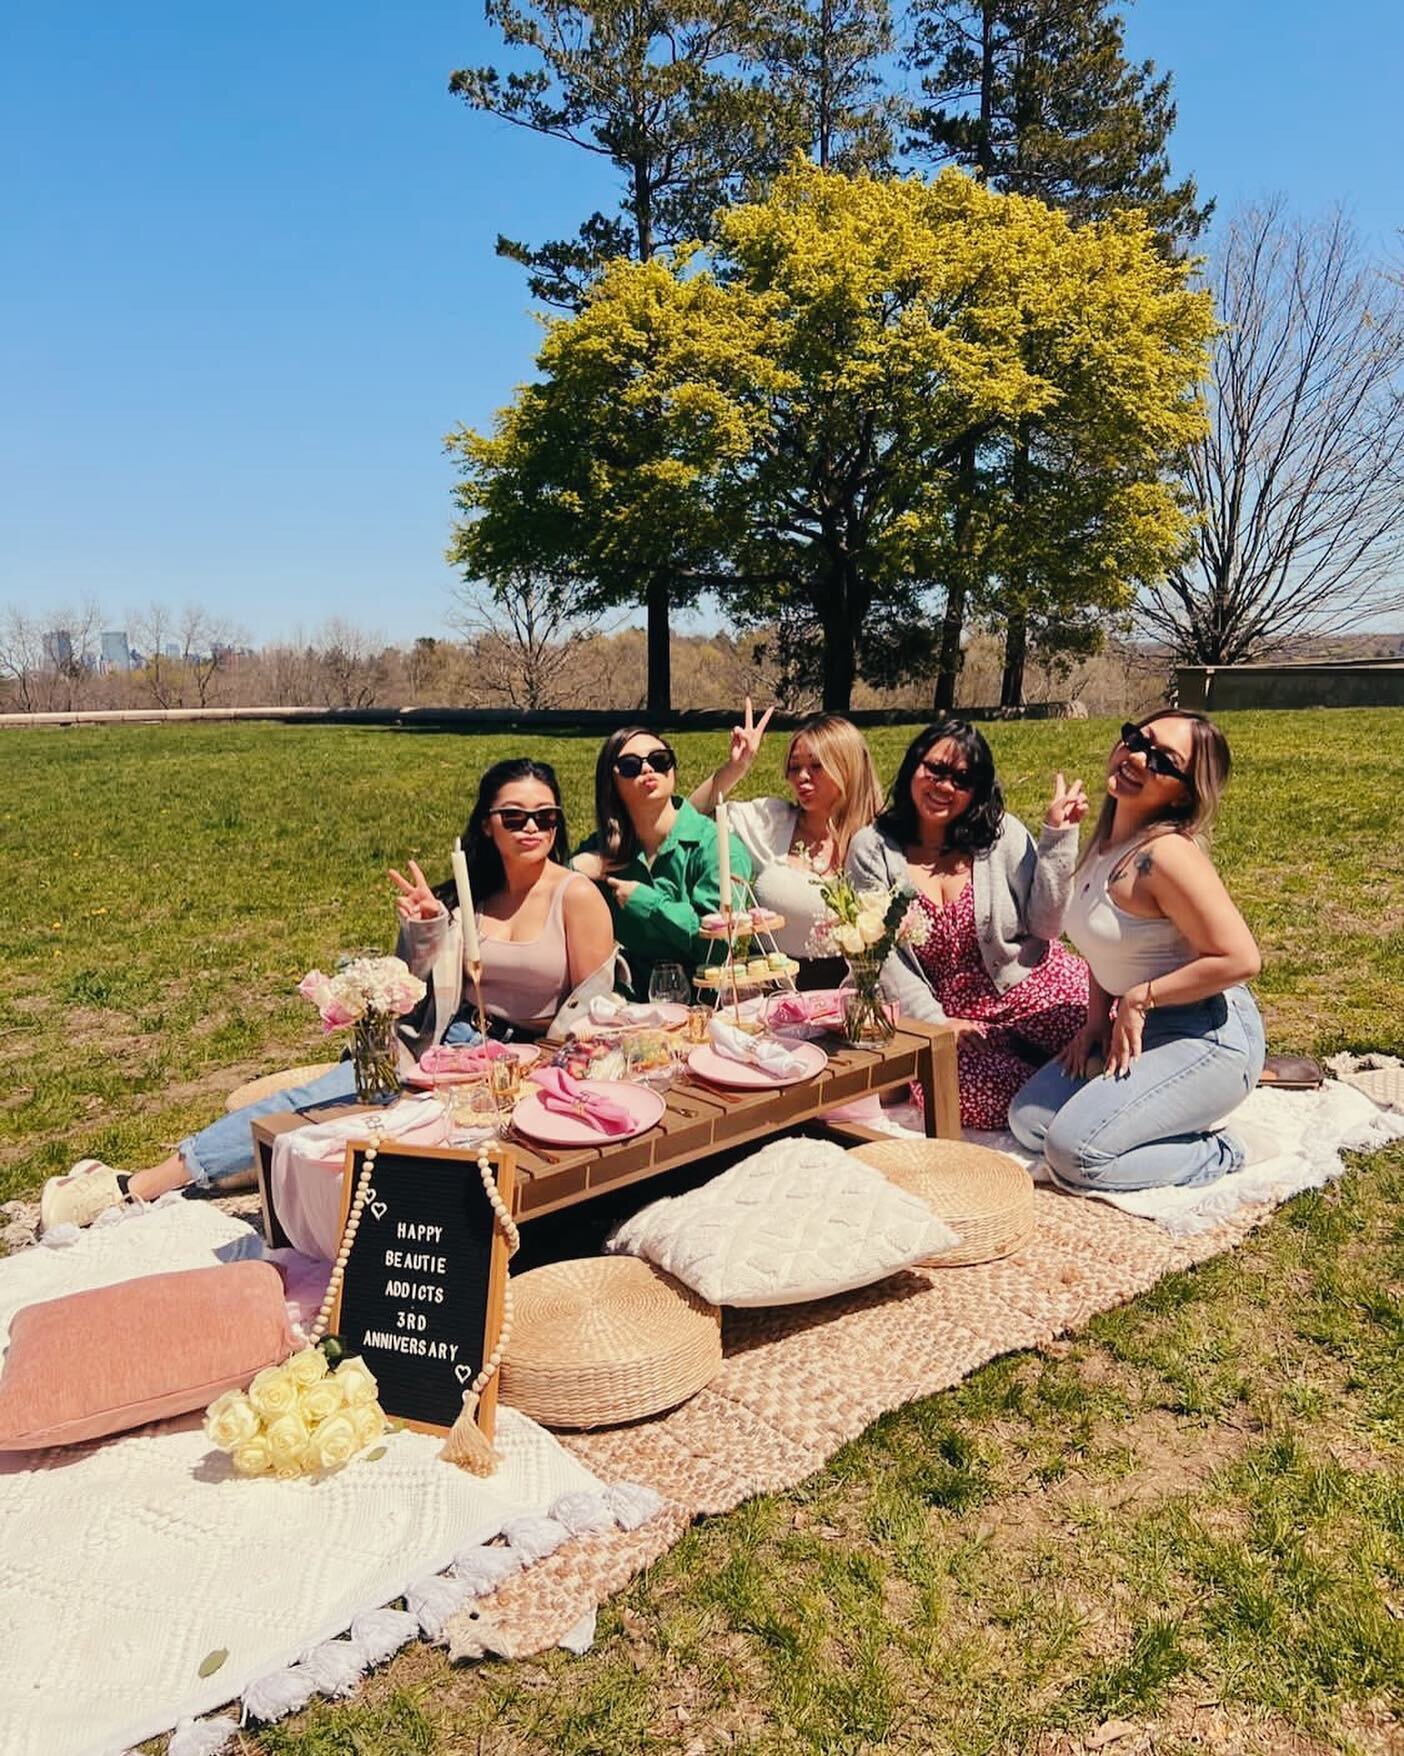 Plan a picnic with your girls! Because? Why not🤩🌸

Share this with your besties and book your picnic with us today ✨

#boston #seaport #bostoncommon #castleisland #carsonbeach #cambridge #northshore #capecod #picnicboston #bachelorette #fun #charcu